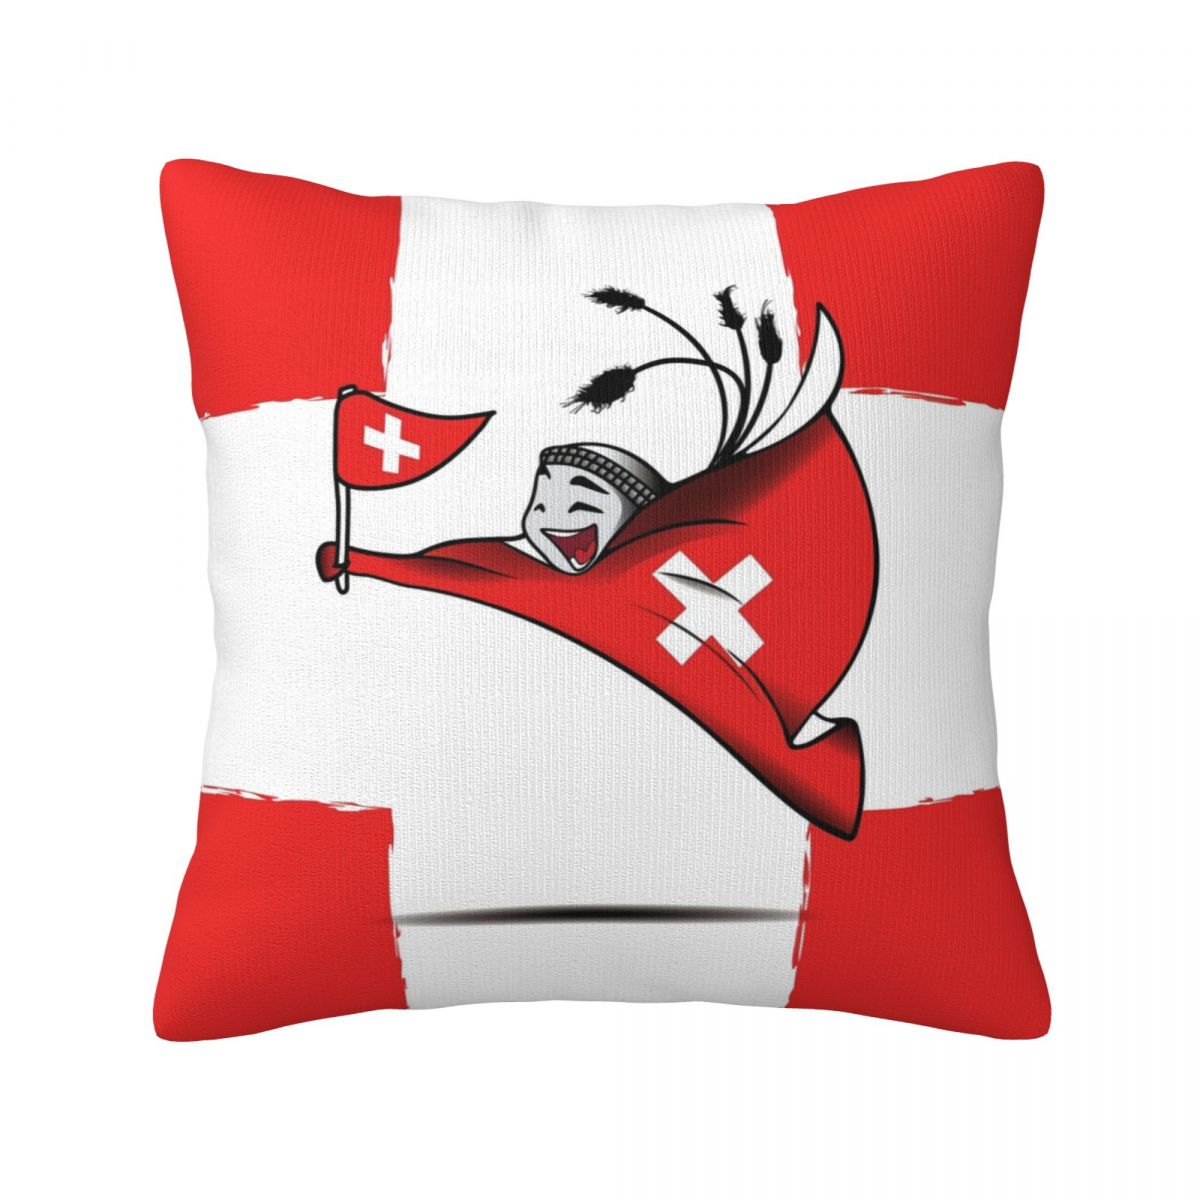 Switzerland World Cup 2022 Mascot Decorative Square Throw Pillow Covers